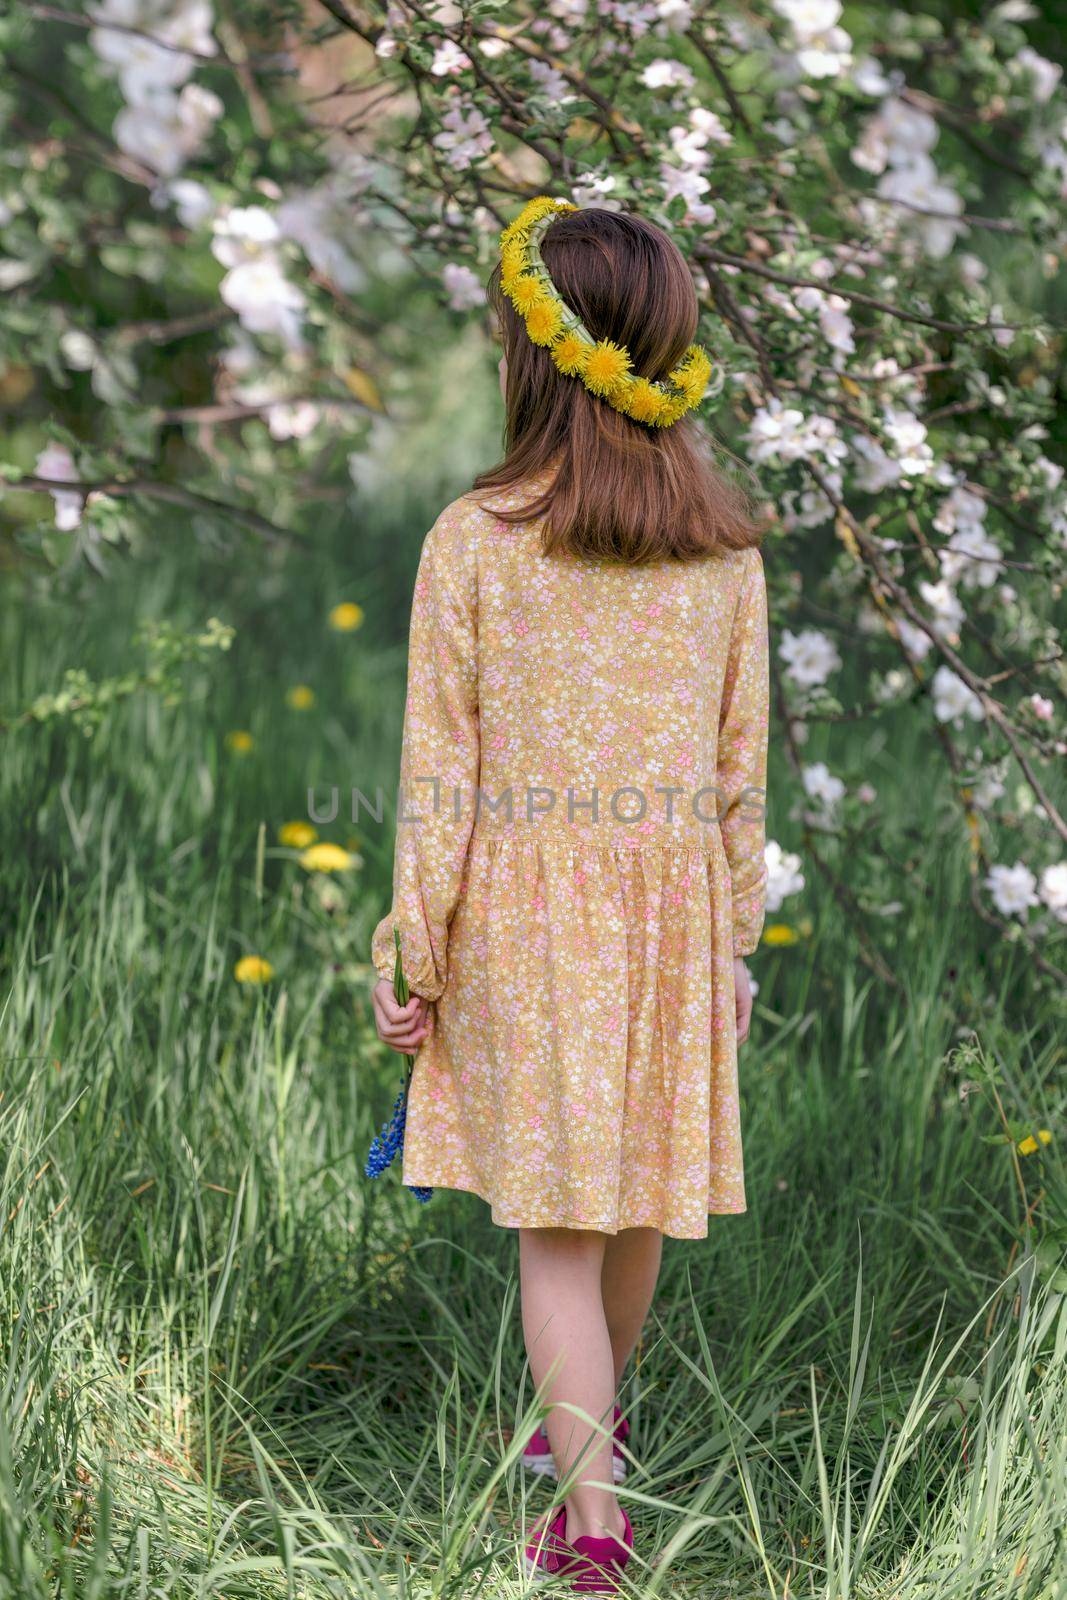 Back rear view Cute little girl wearing flower wreath dandelion outdoors. Adorable girl with dandelion wreath on her head spending time in nature. Floral crown, symbol of summer solstice.